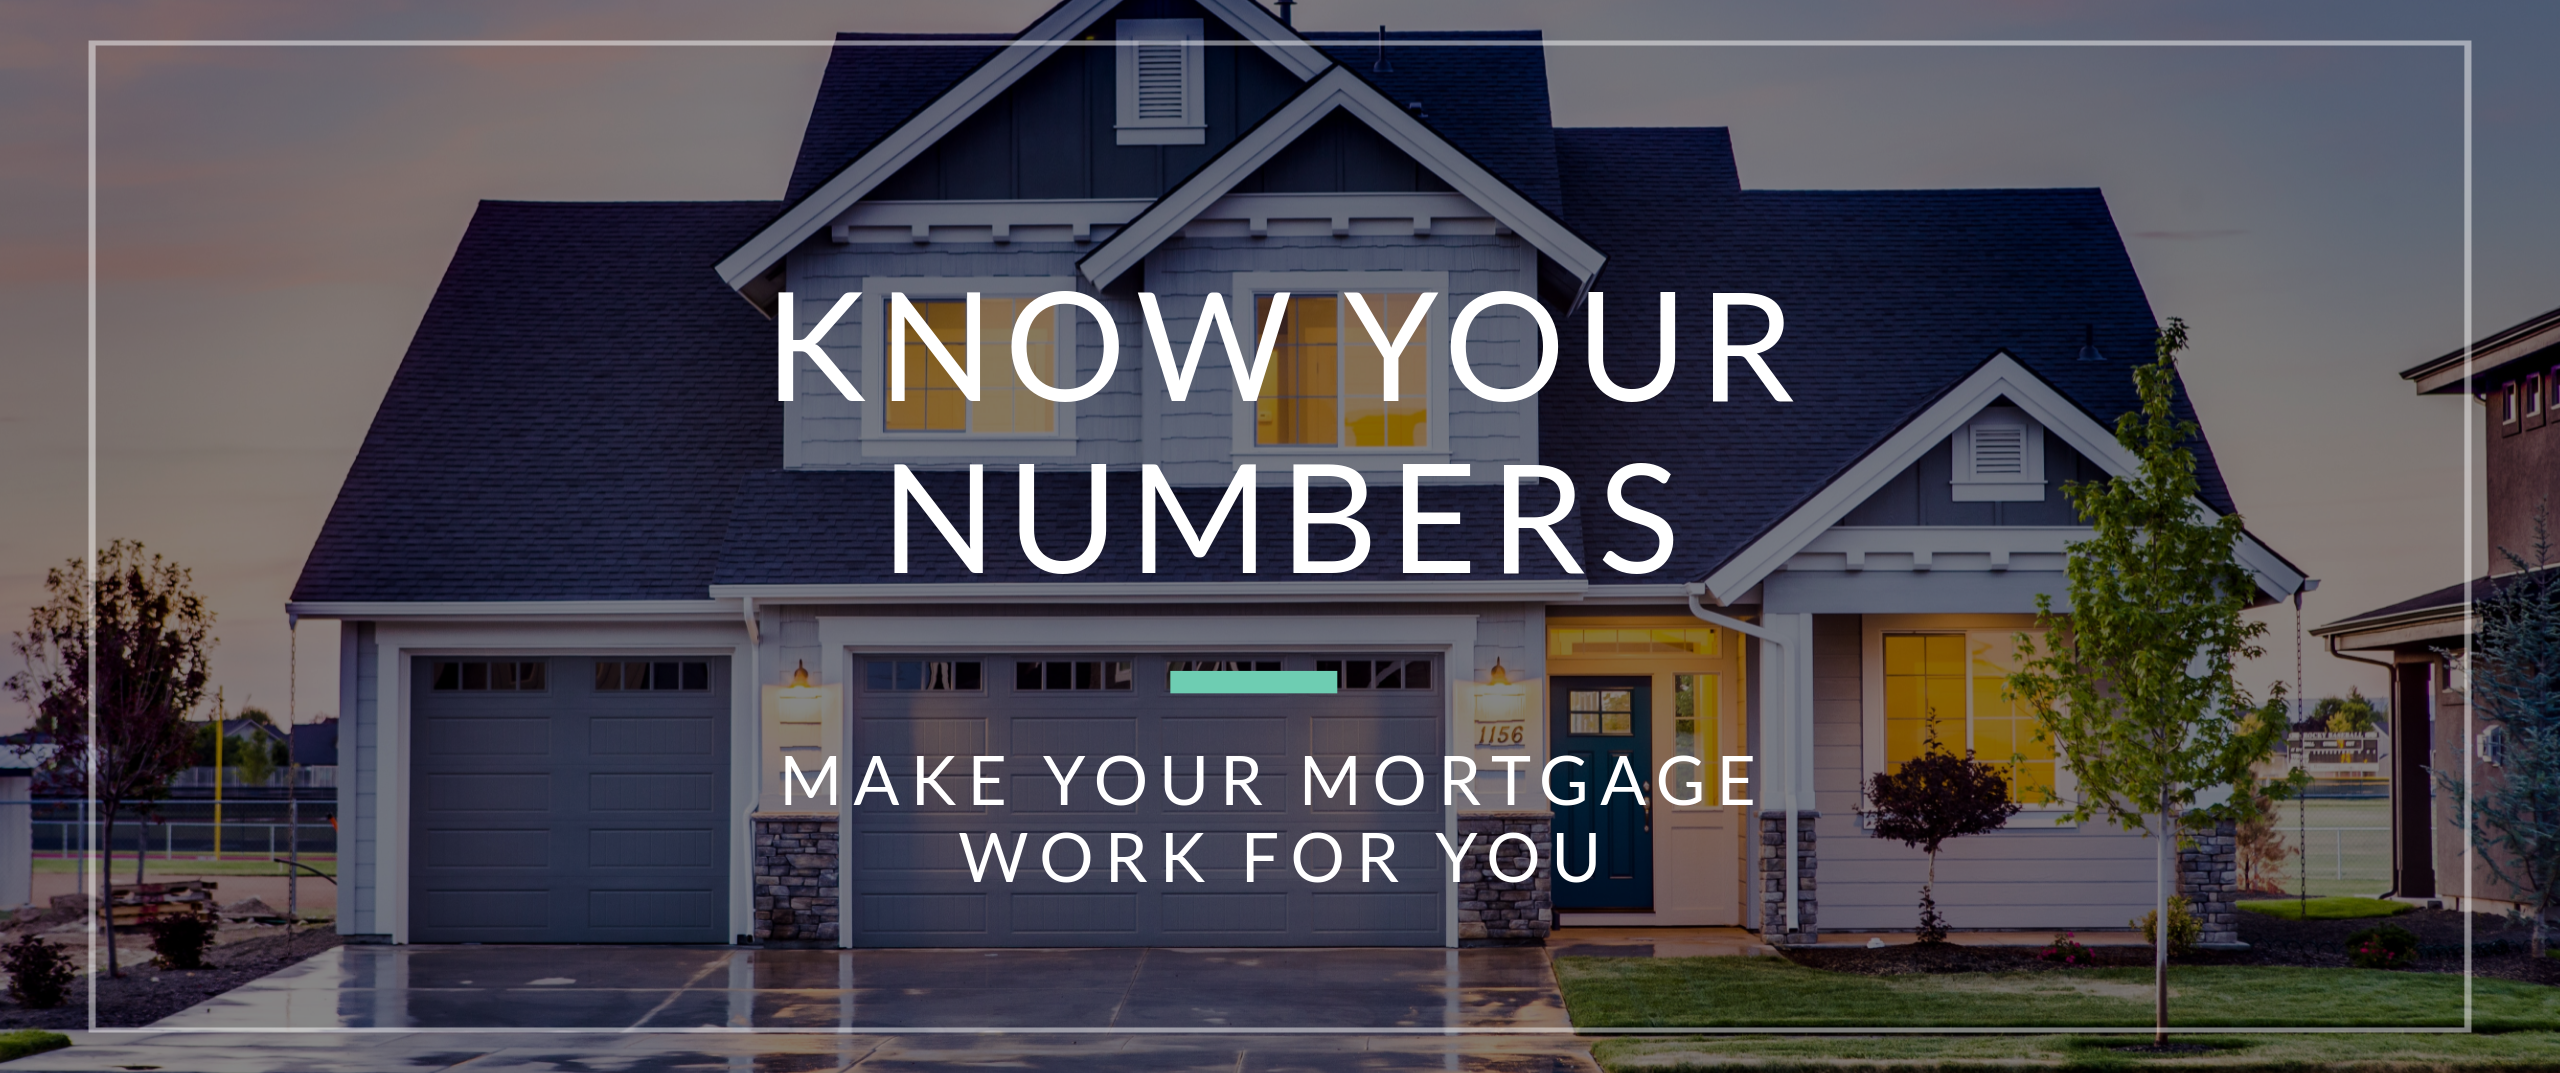 Tips to Make Your Real Estate Offer Stand Out - Part 2: Know Your Numbers